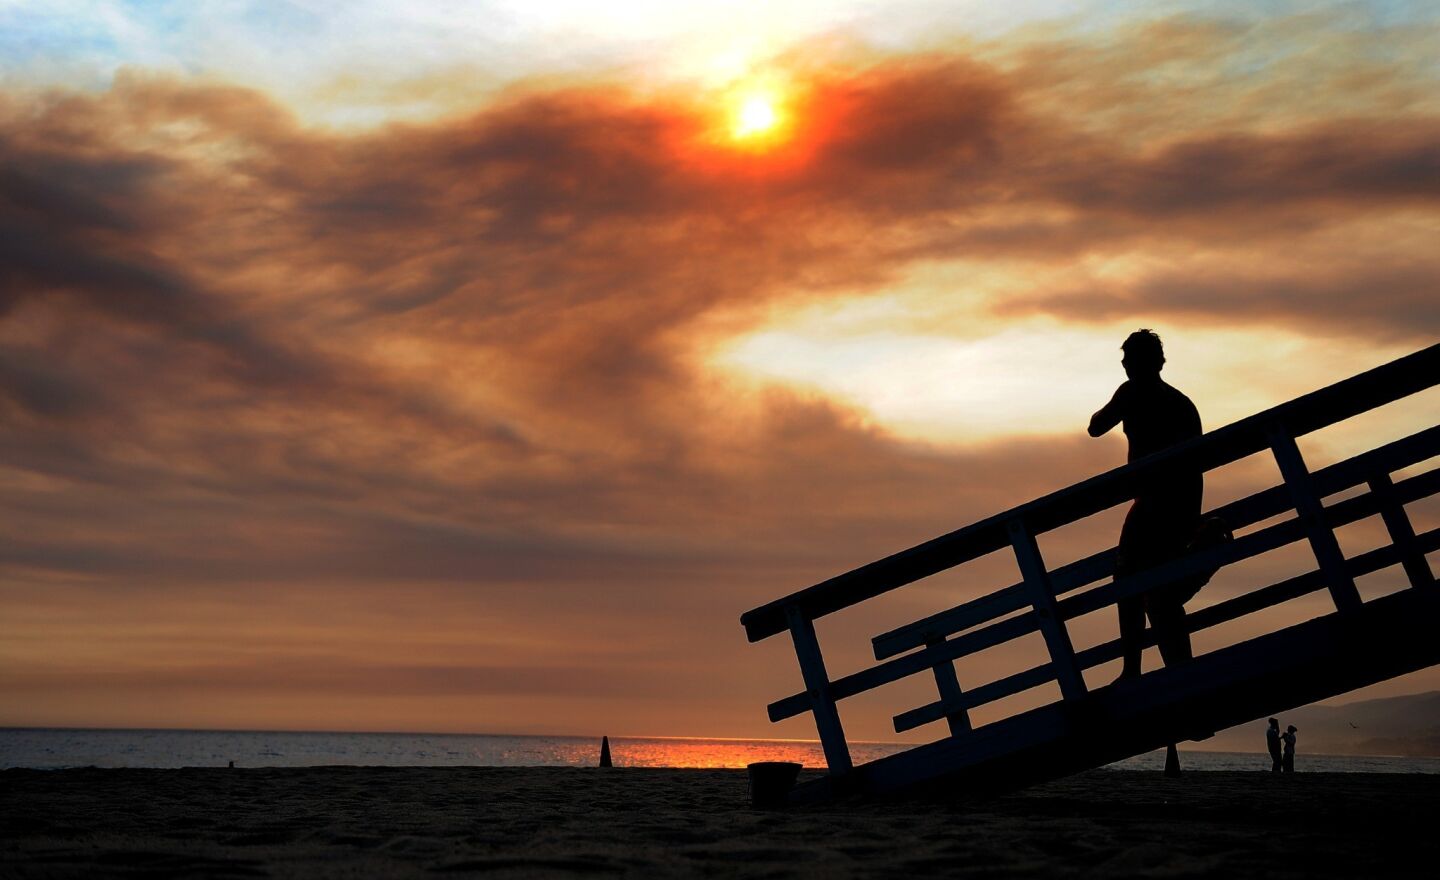 As smoke billows from the Springs fire, a lifeguard keeps an eye on swimmers at Zuma Beach.